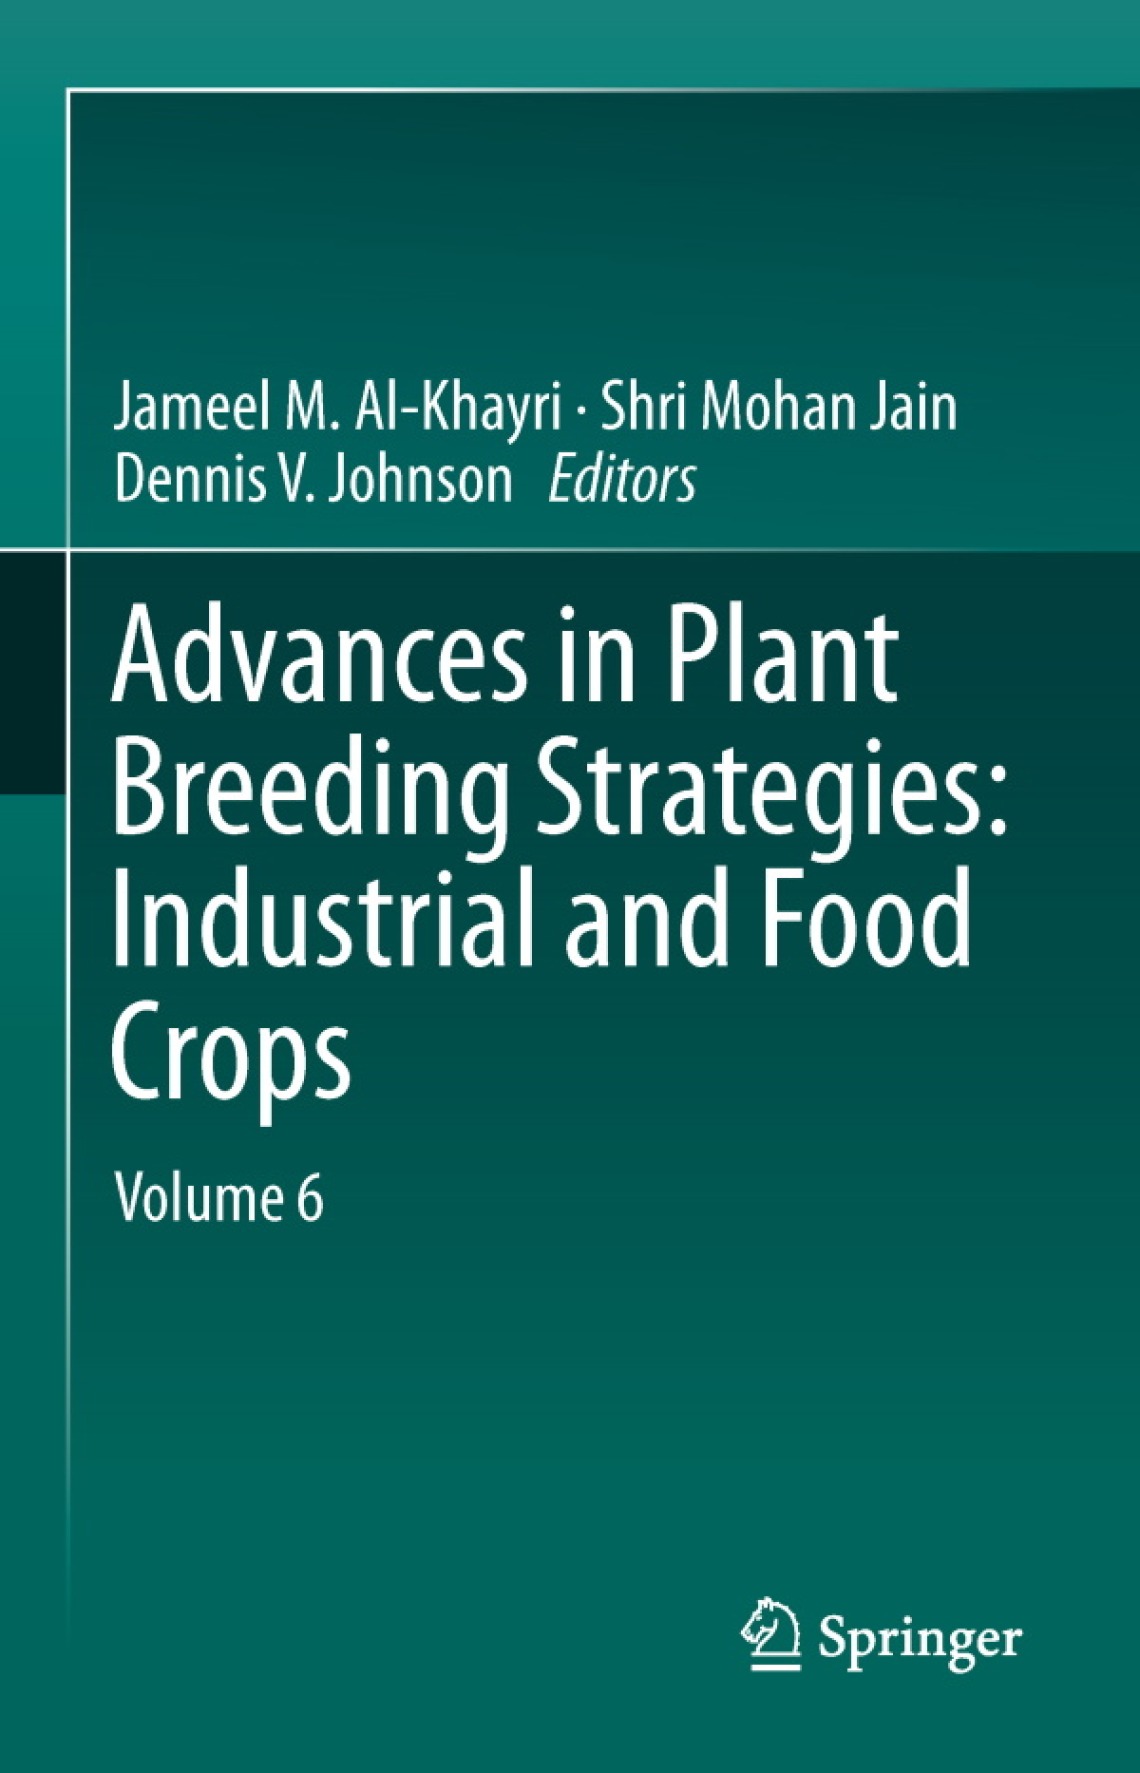 2019 Advances in Plant Breeding Strategies: Industrial and Food Crops